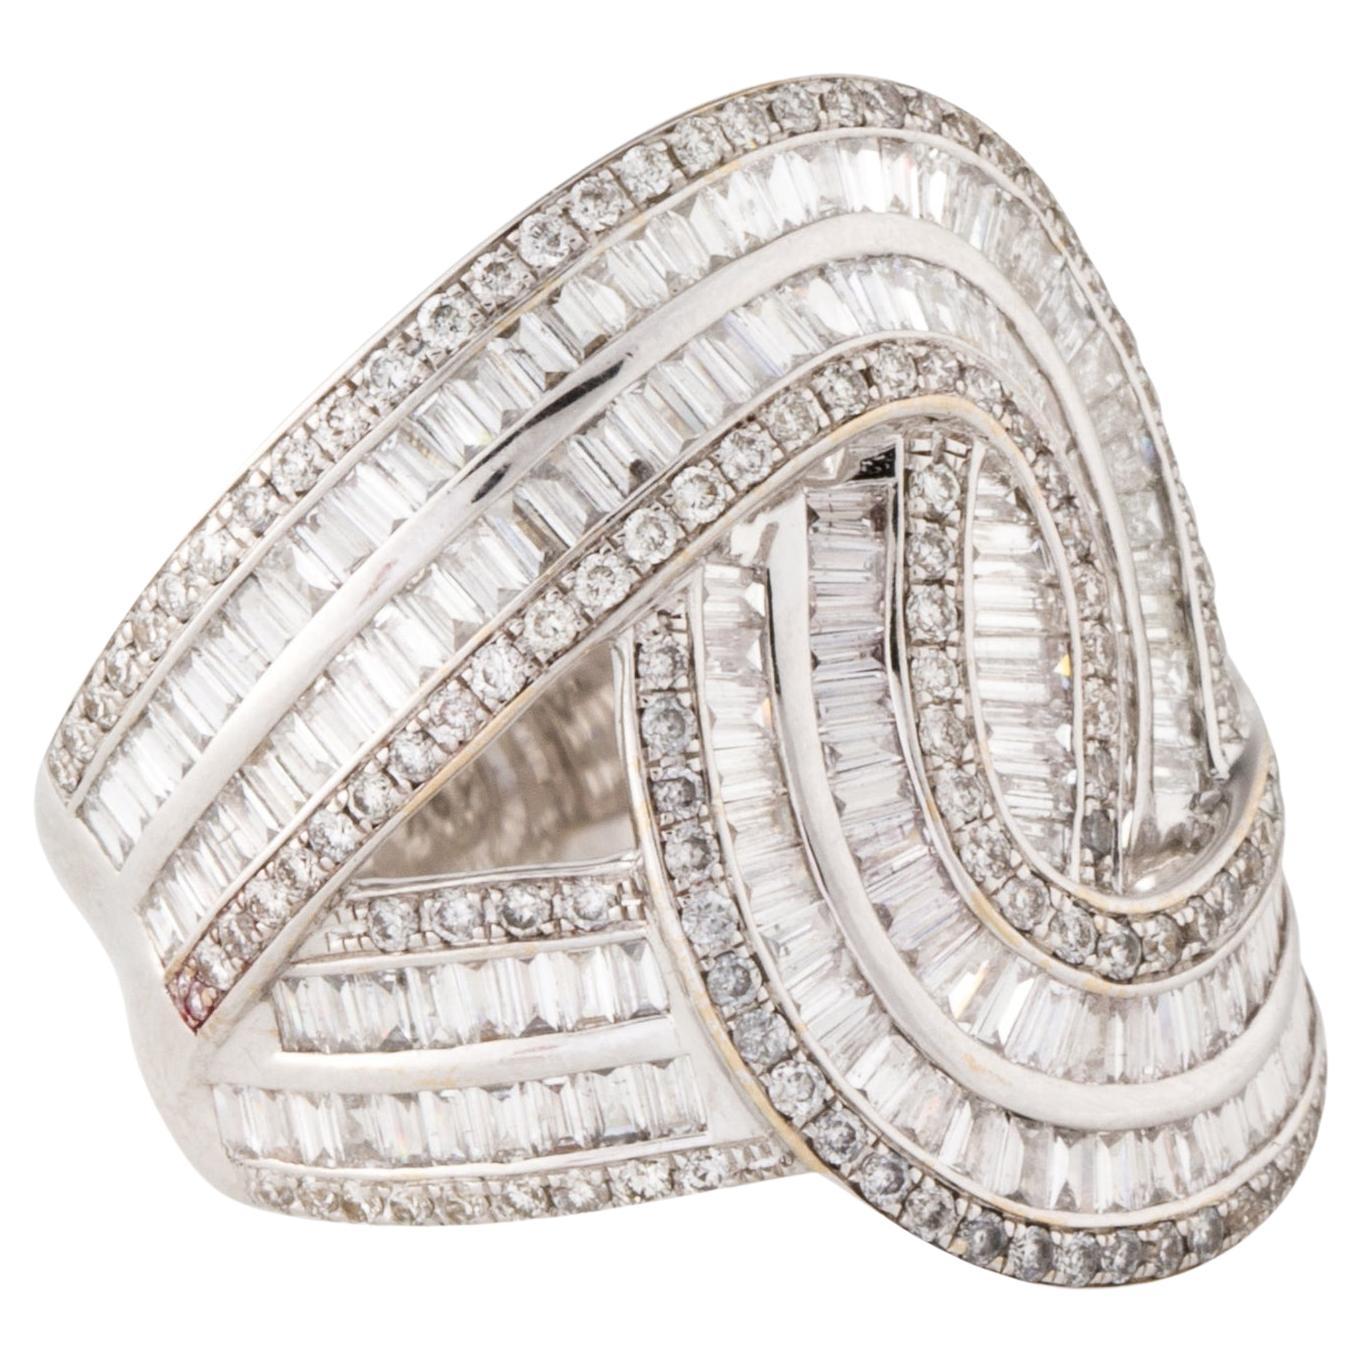 Luxurious 18K White Gold Diamond Cocktail Ring, 2.46ctw, Round & Baguette Cut For Sale